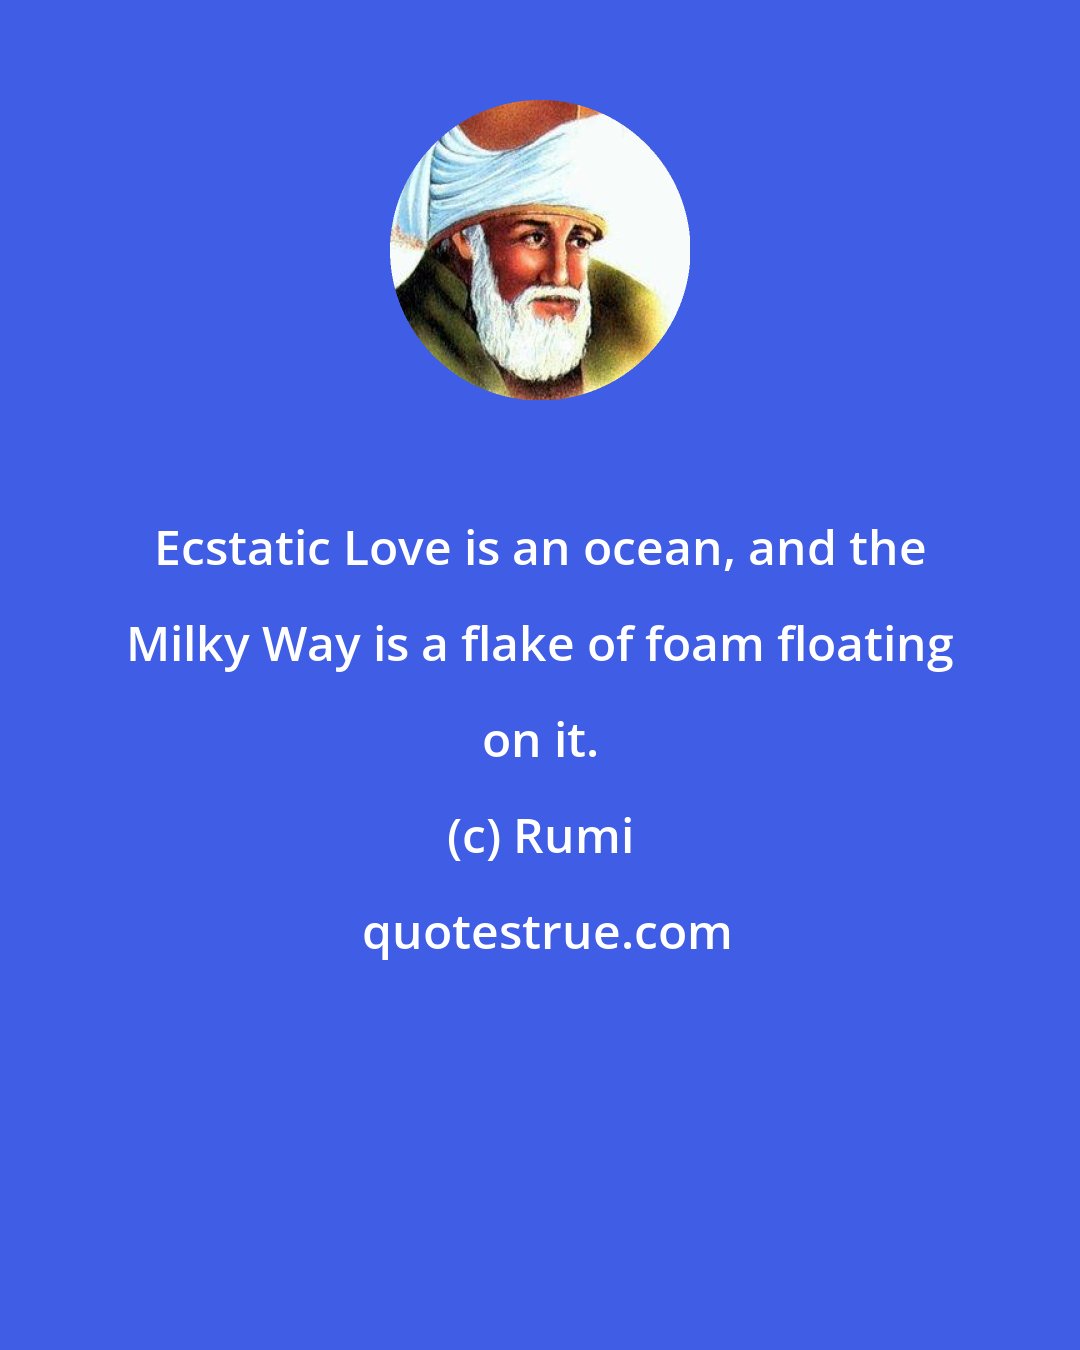 Rumi: Ecstatic Love is an ocean, and the Milky Way is a flake of foam floating on it.